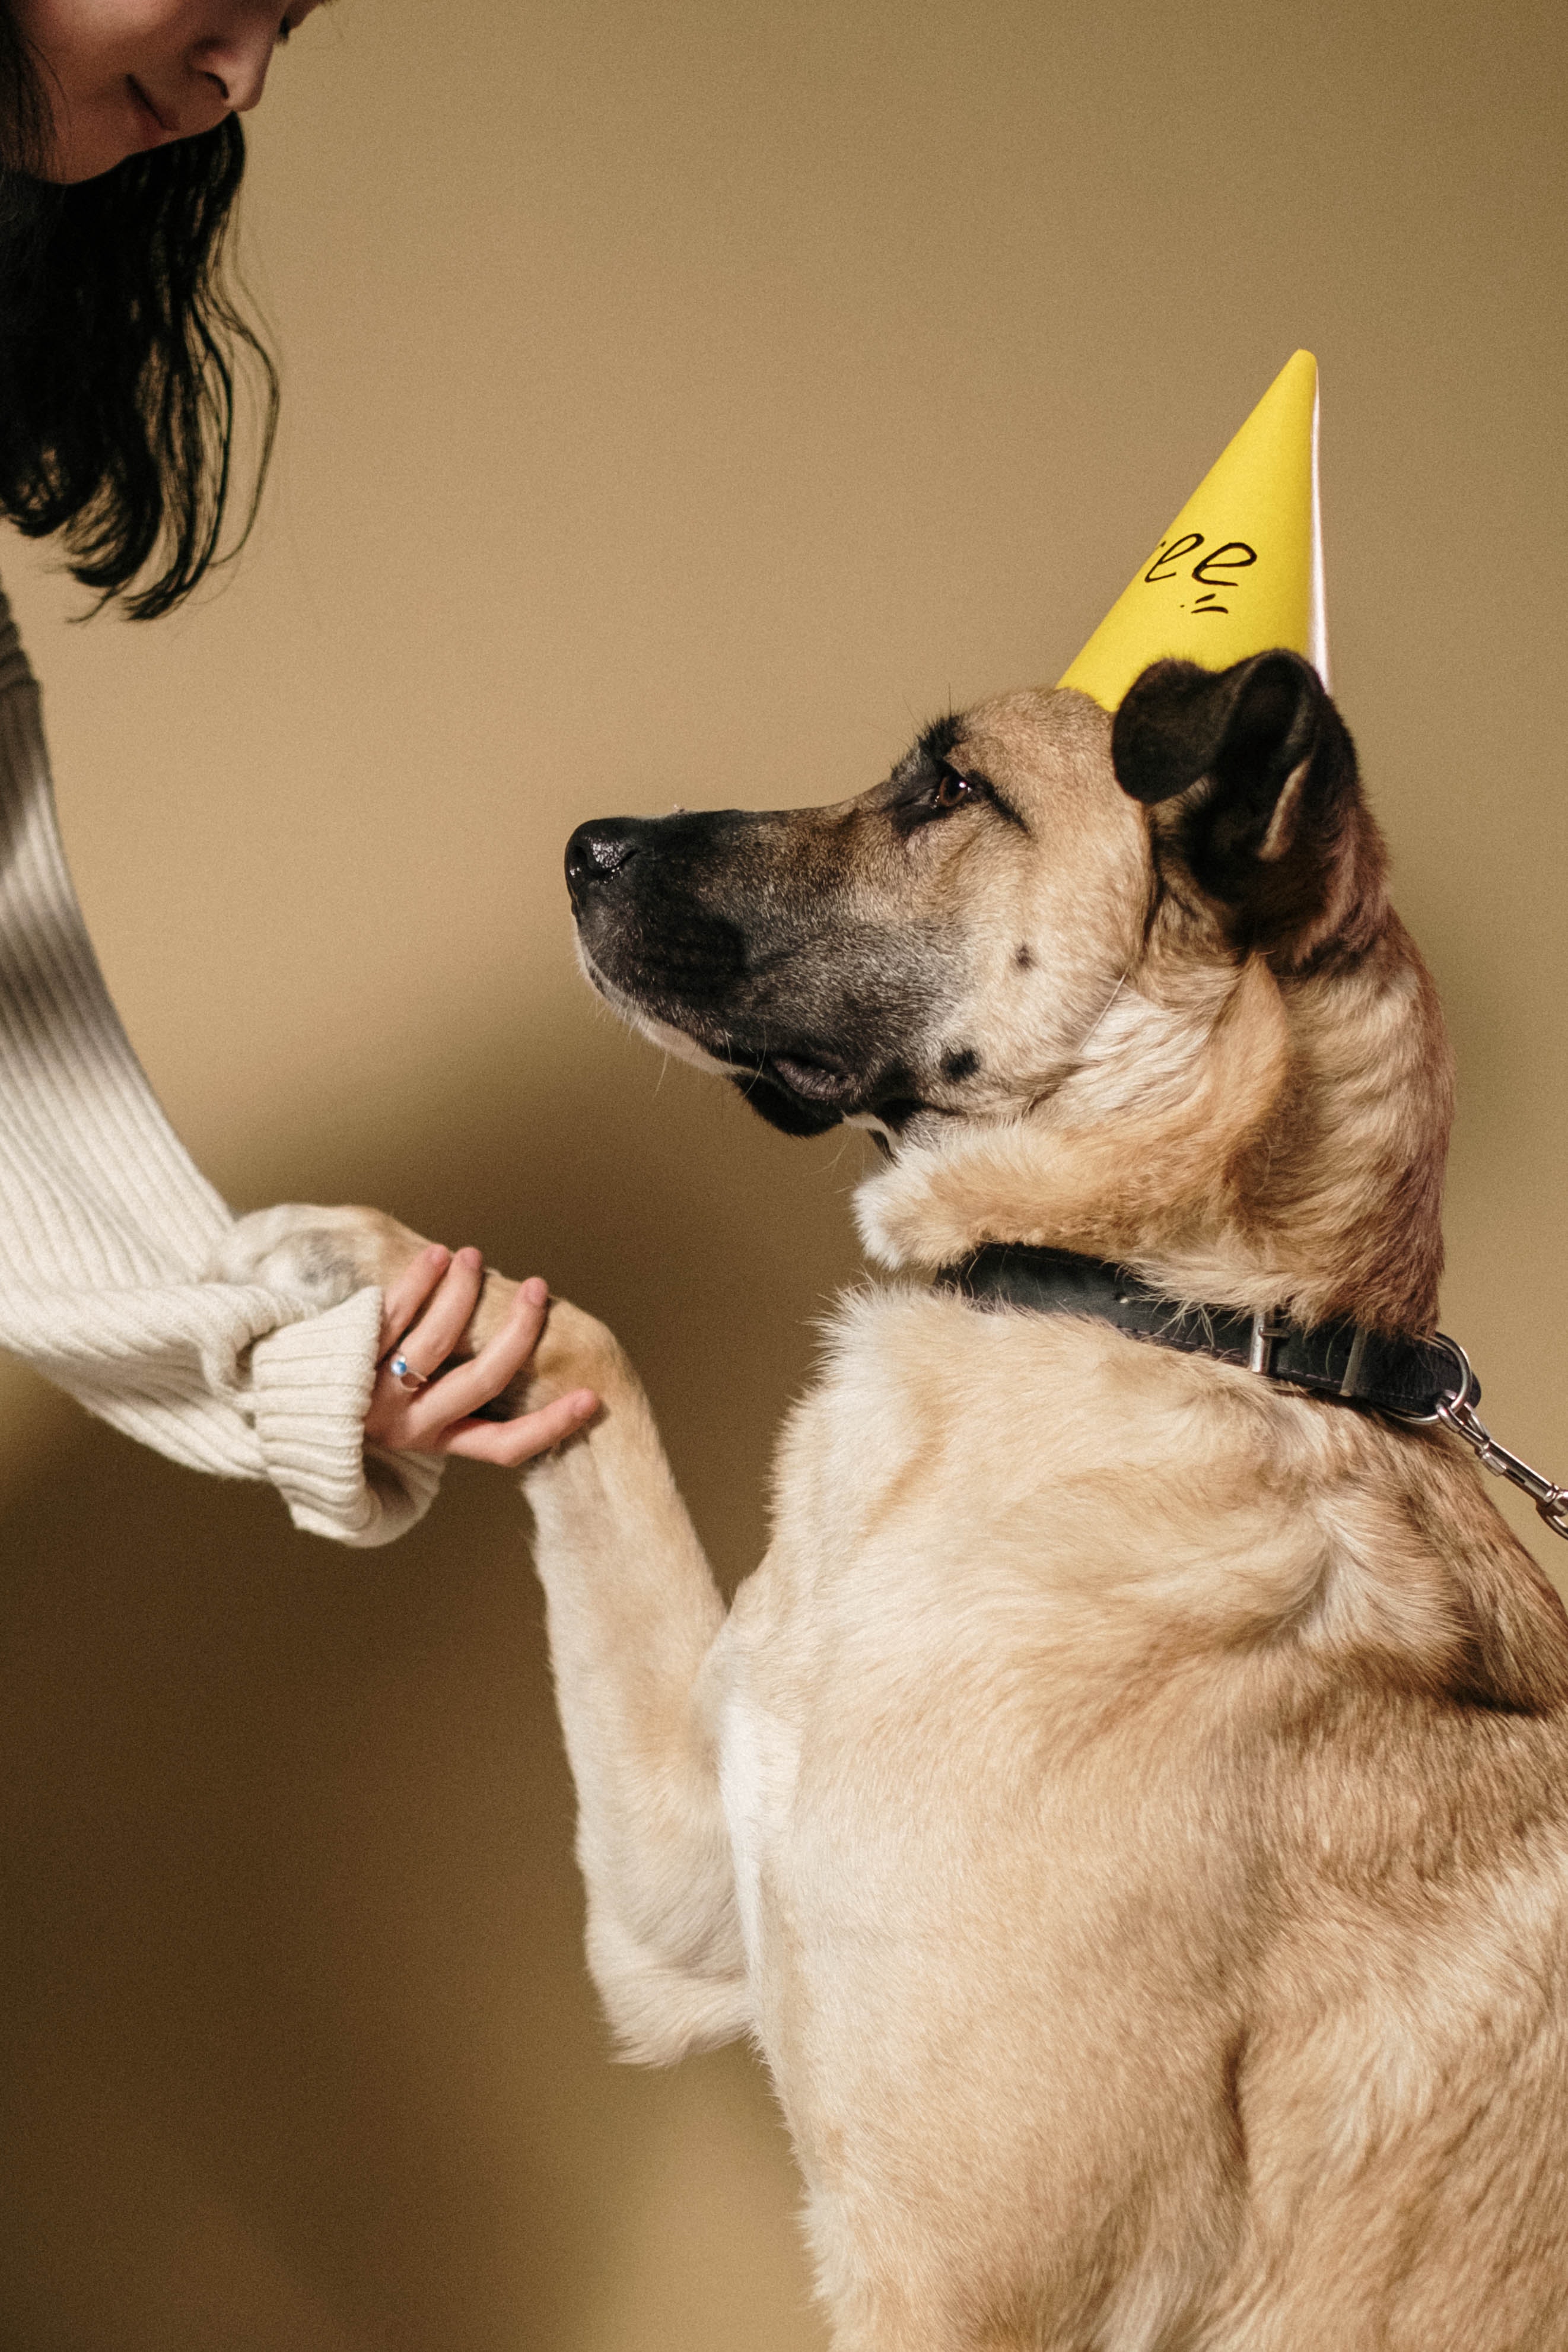 10 Shocking Ways to Get Your Dog to Pay Attention